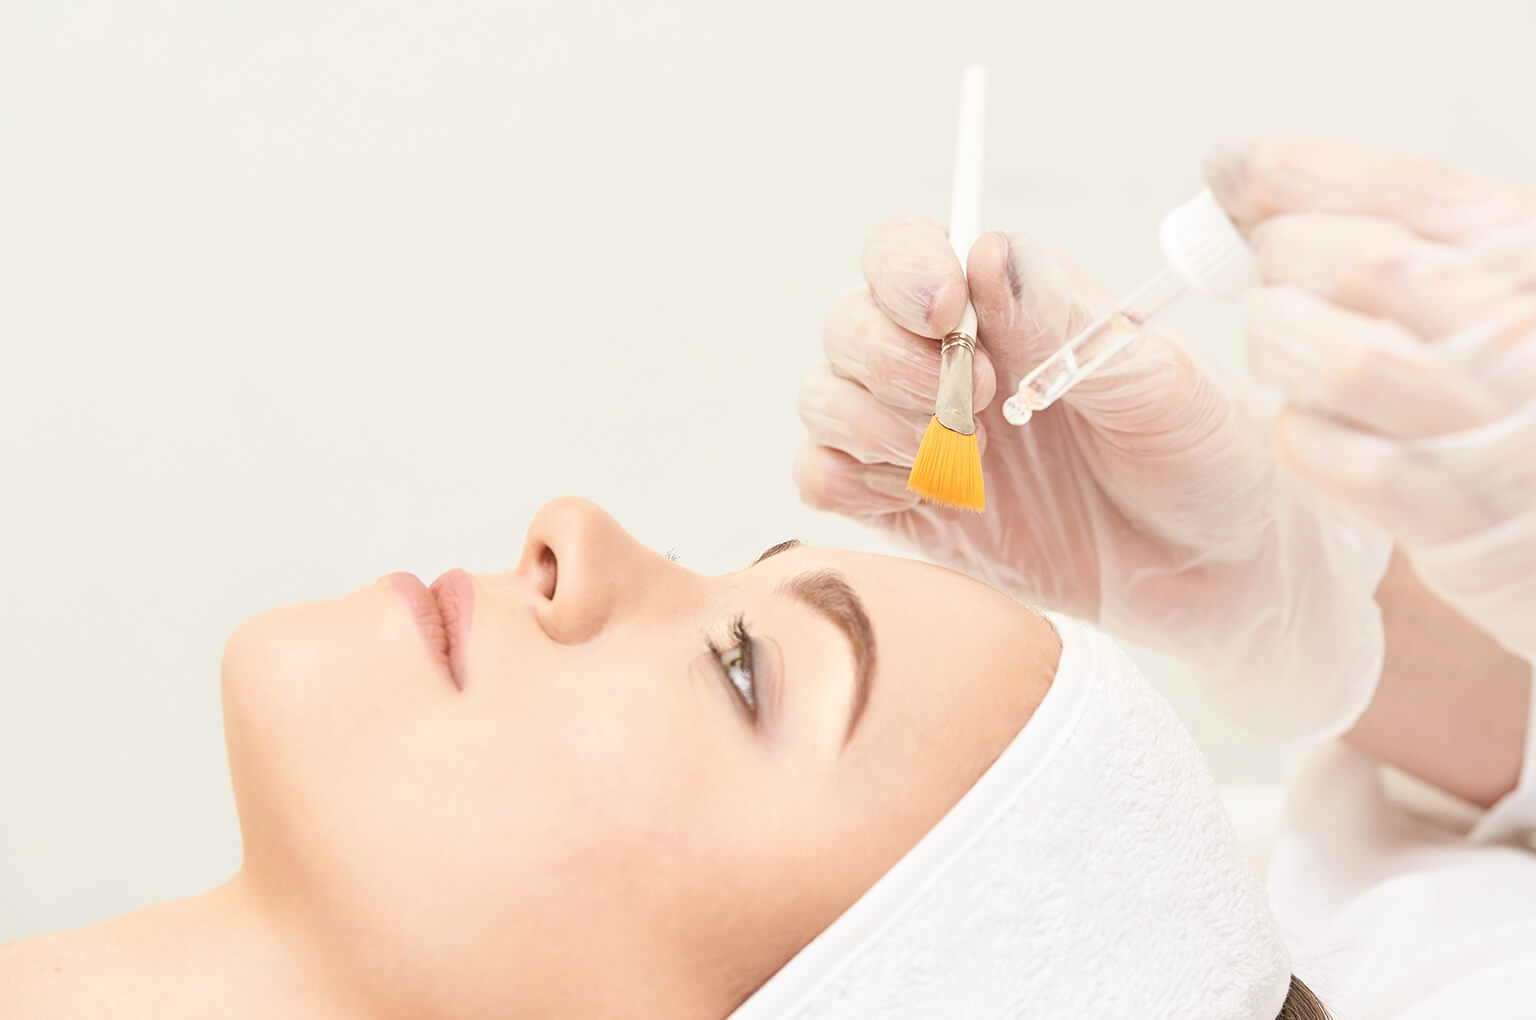 What are chemical peels?